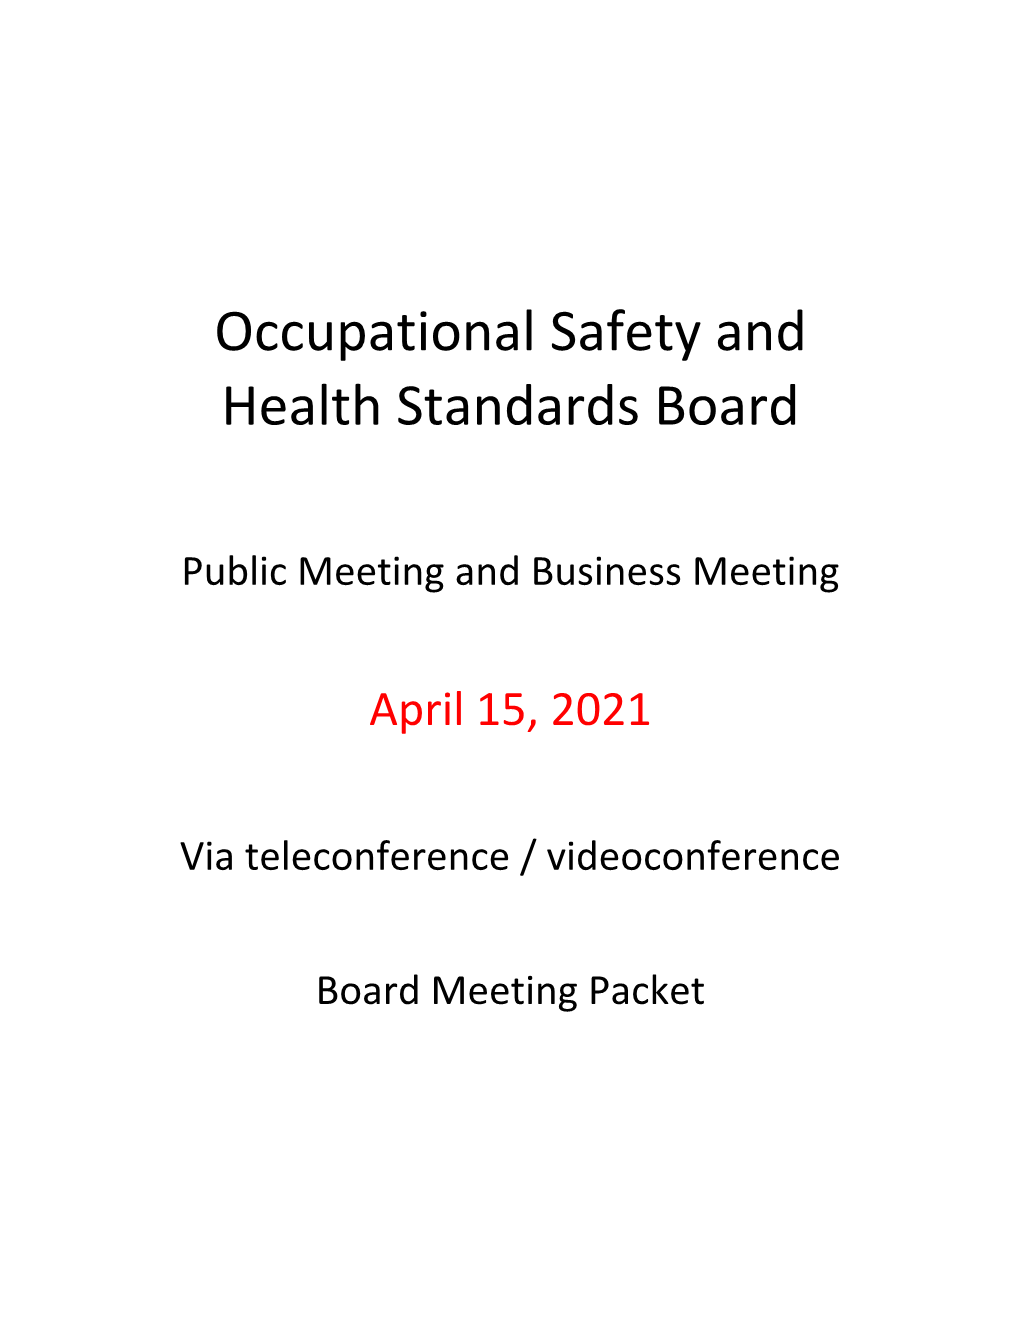 Occupational Safety and Health Standards Board